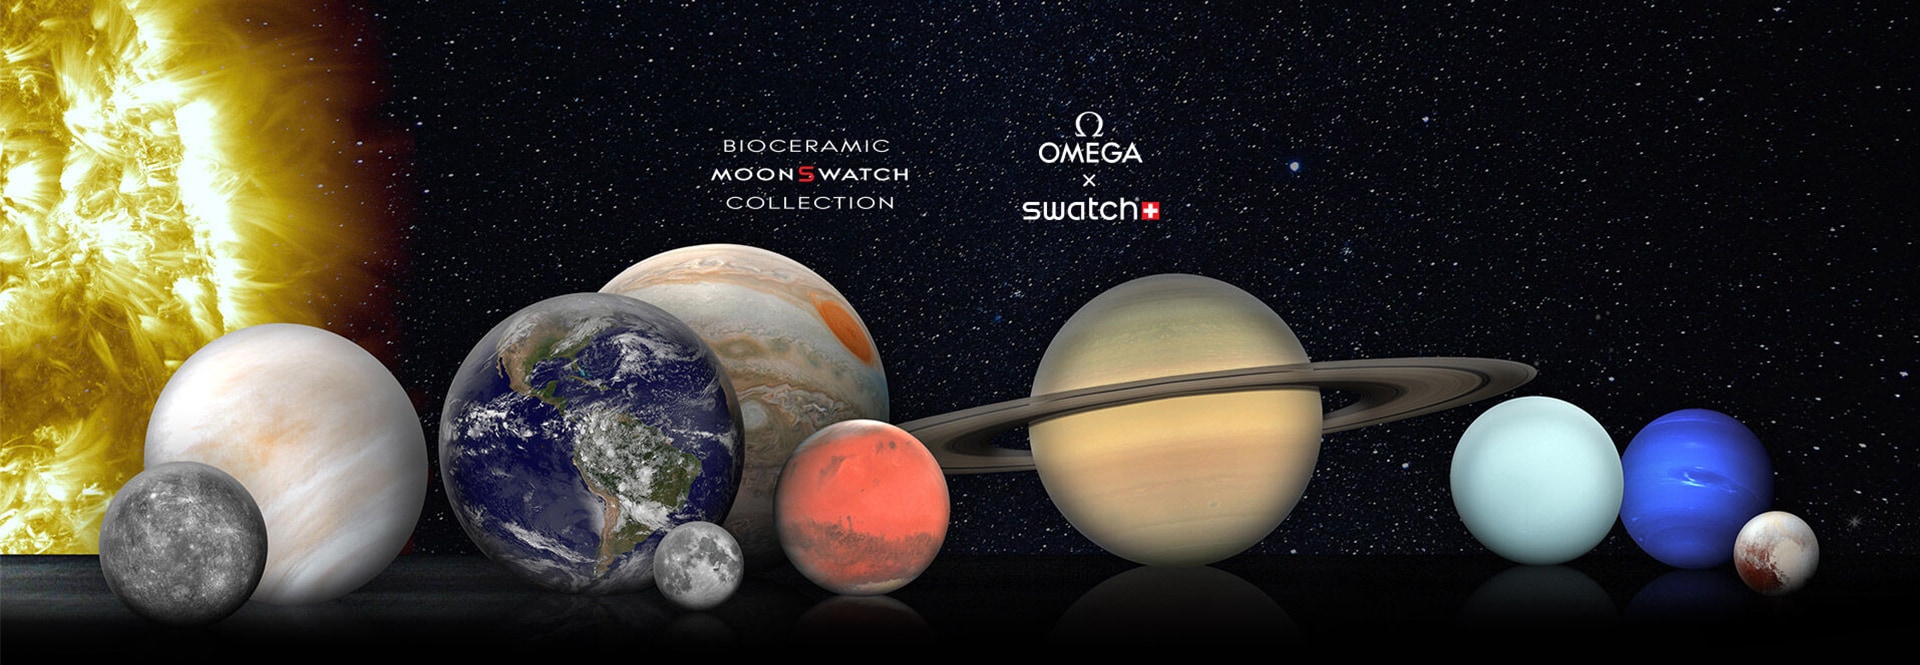 swatch collection banner